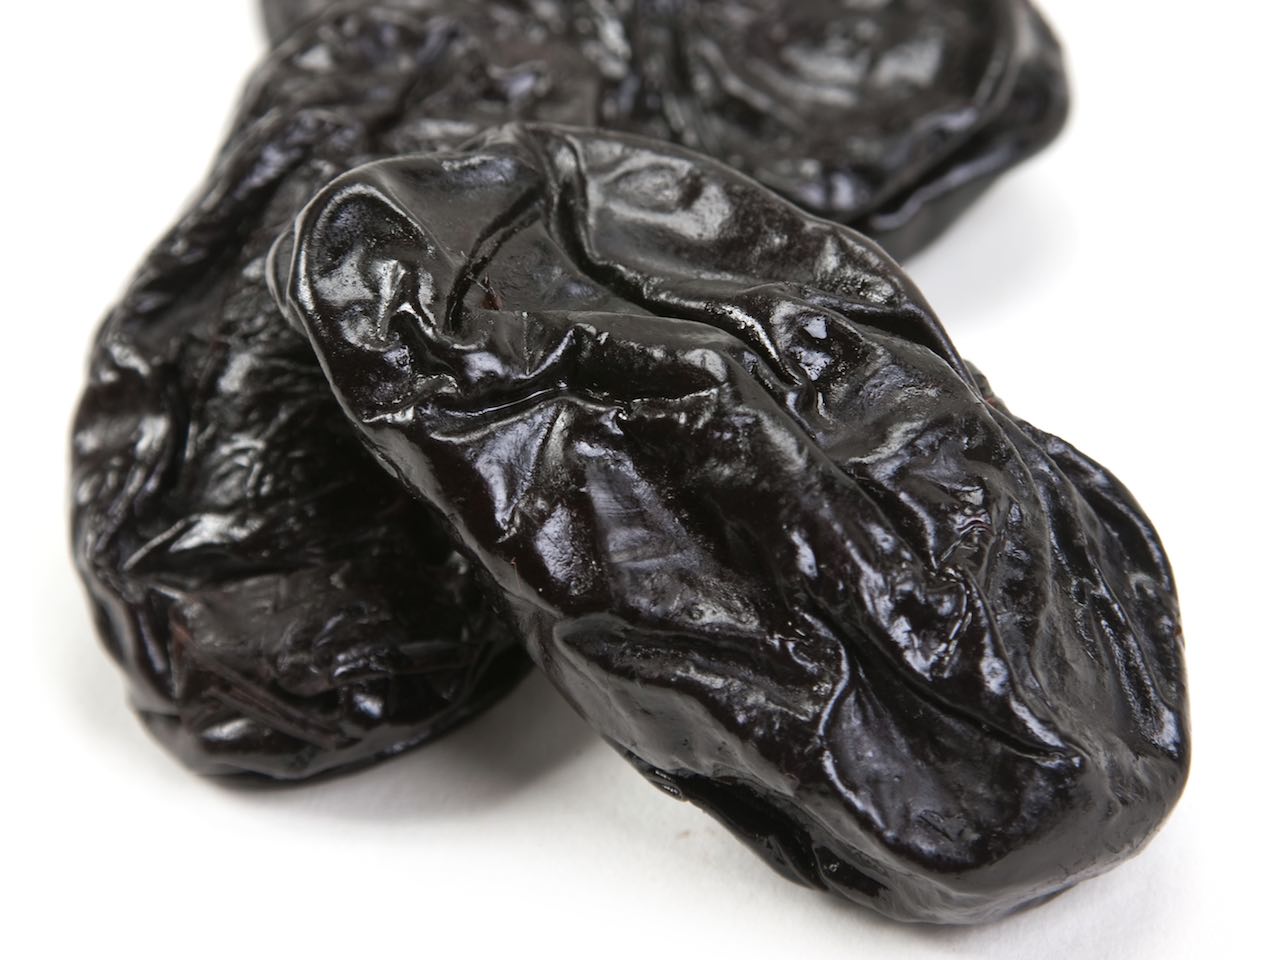 5 Reasons You Should Eat More Prunes | Chatelaine